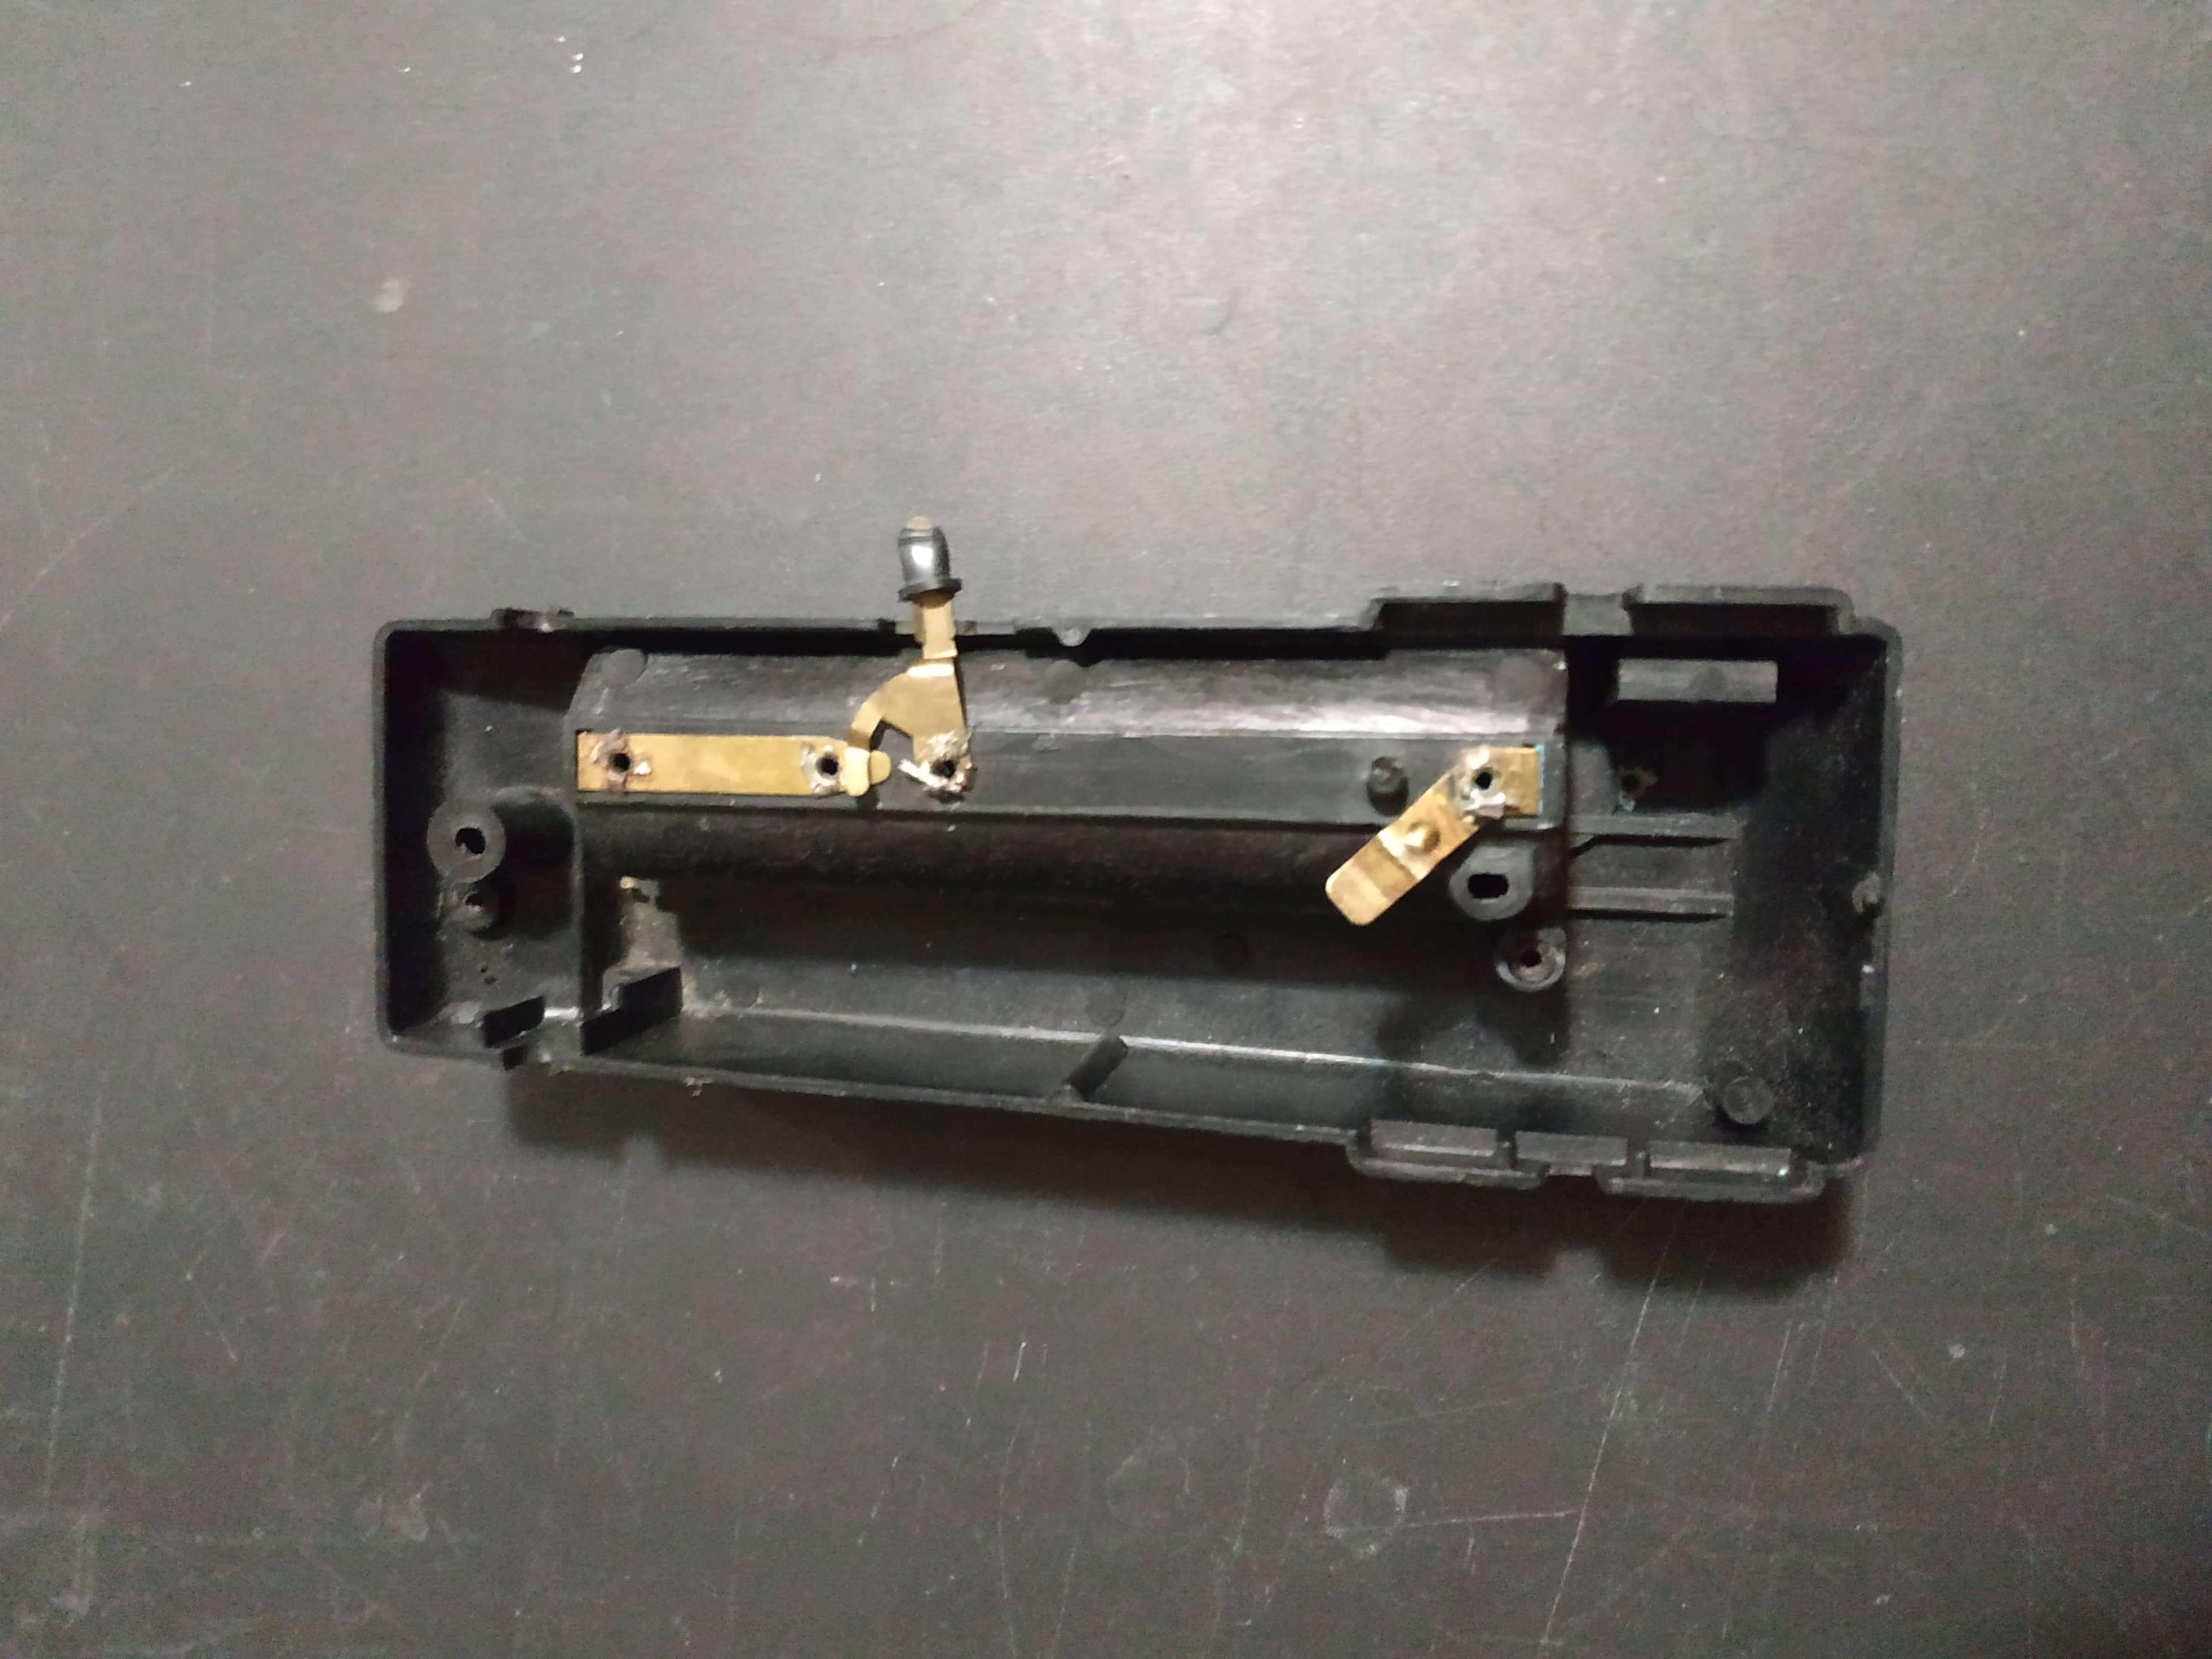 A black plastic part with shiny brass parts connected to it